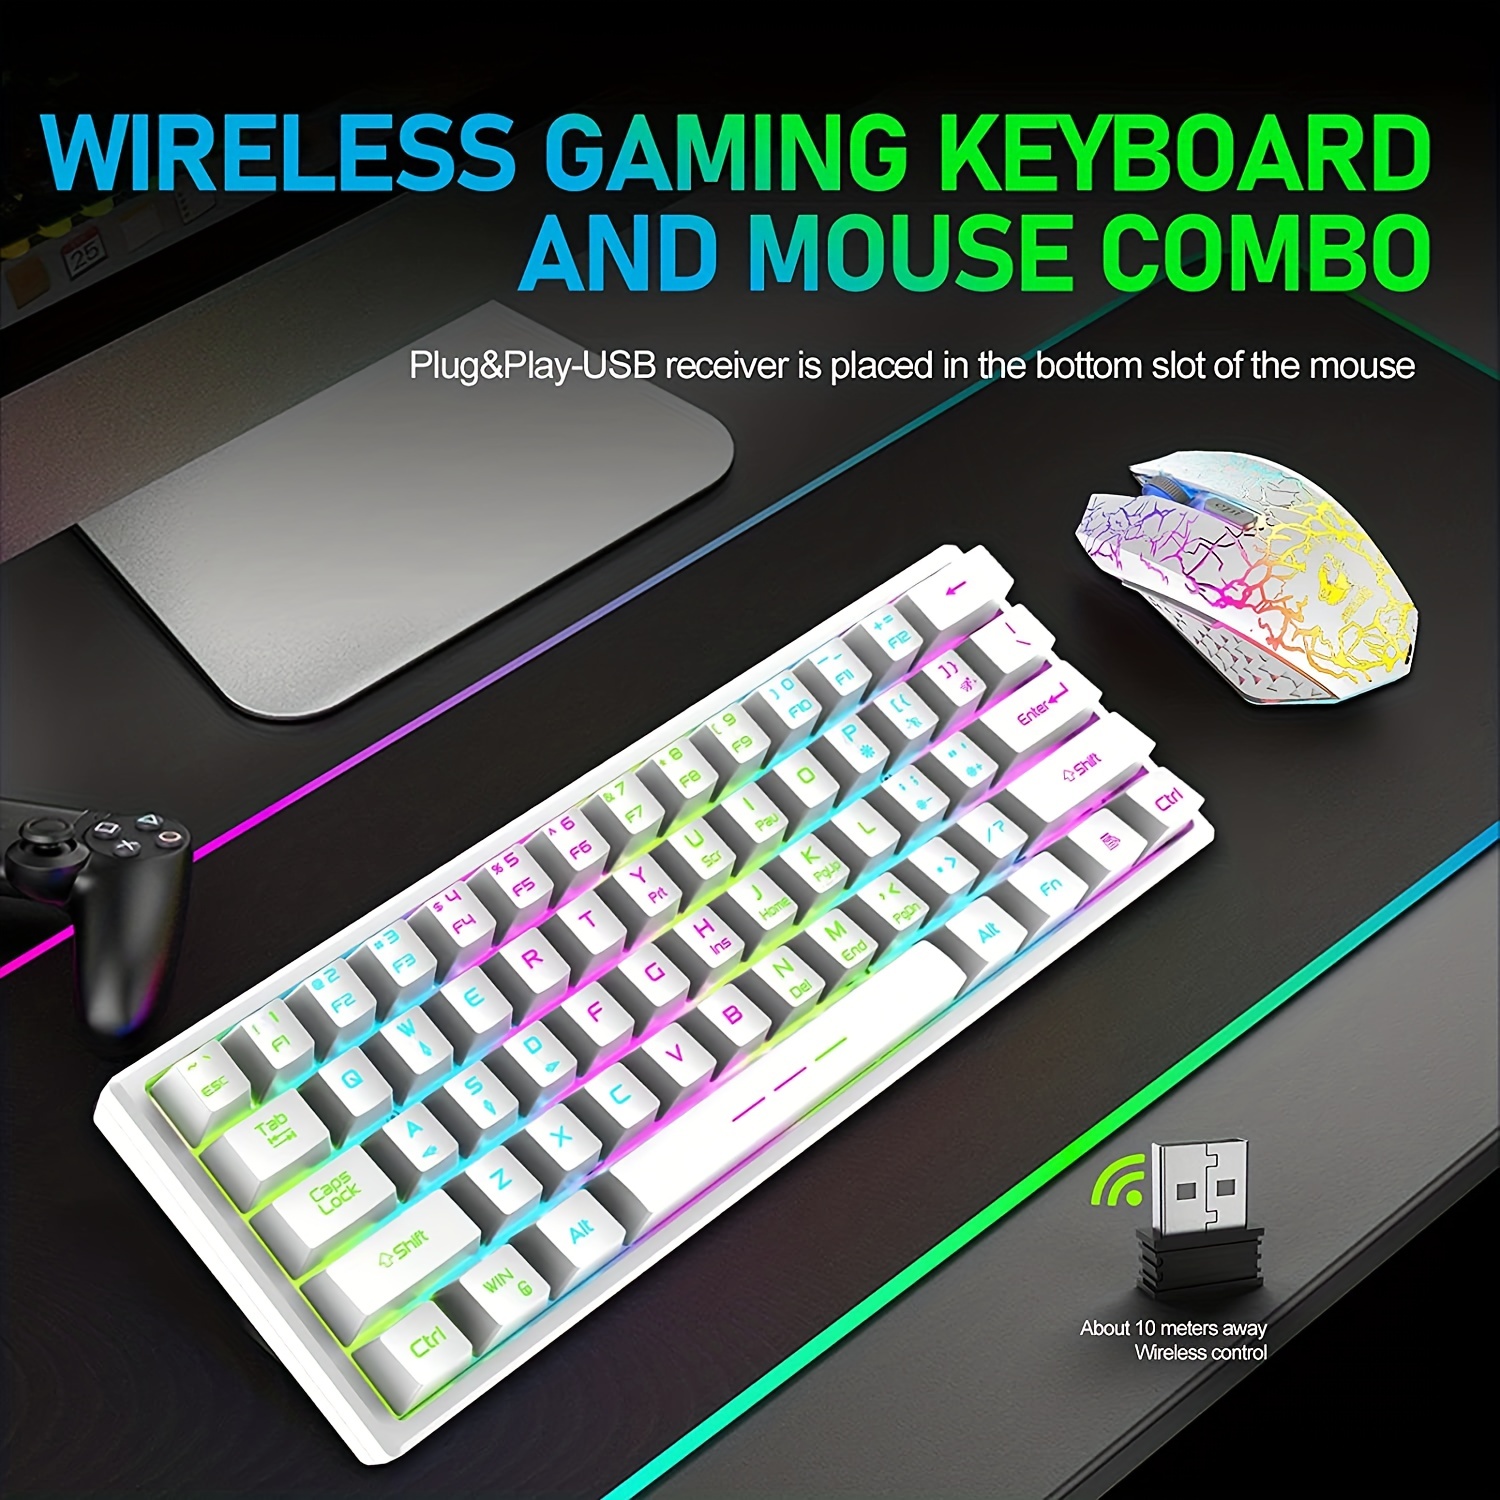 Wireless gaming Keyboard and Mouse,Rainbow Backlit Rechargeable Keyboard  Mouse with 3800mAh Battery Metal Panel,Removable Hand Rest Mechanical Feel